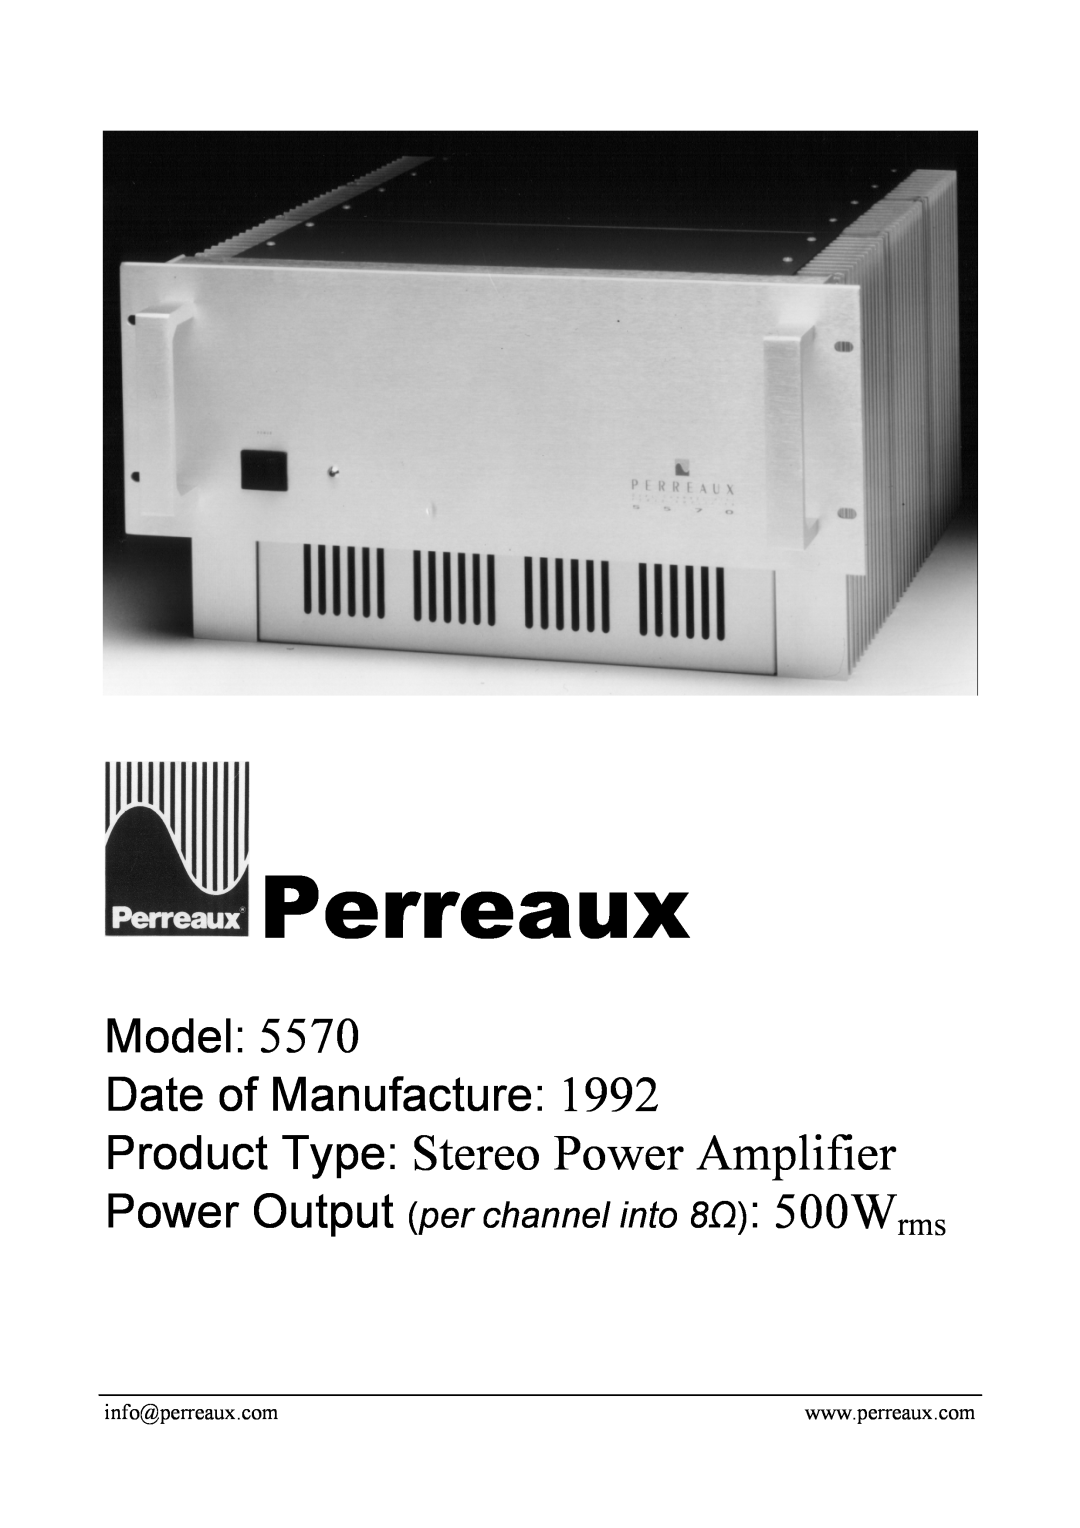 Perreaux 5570 manual Perreaux, Product Type Stereo Power Amplifier, Model Date of Manufacture 